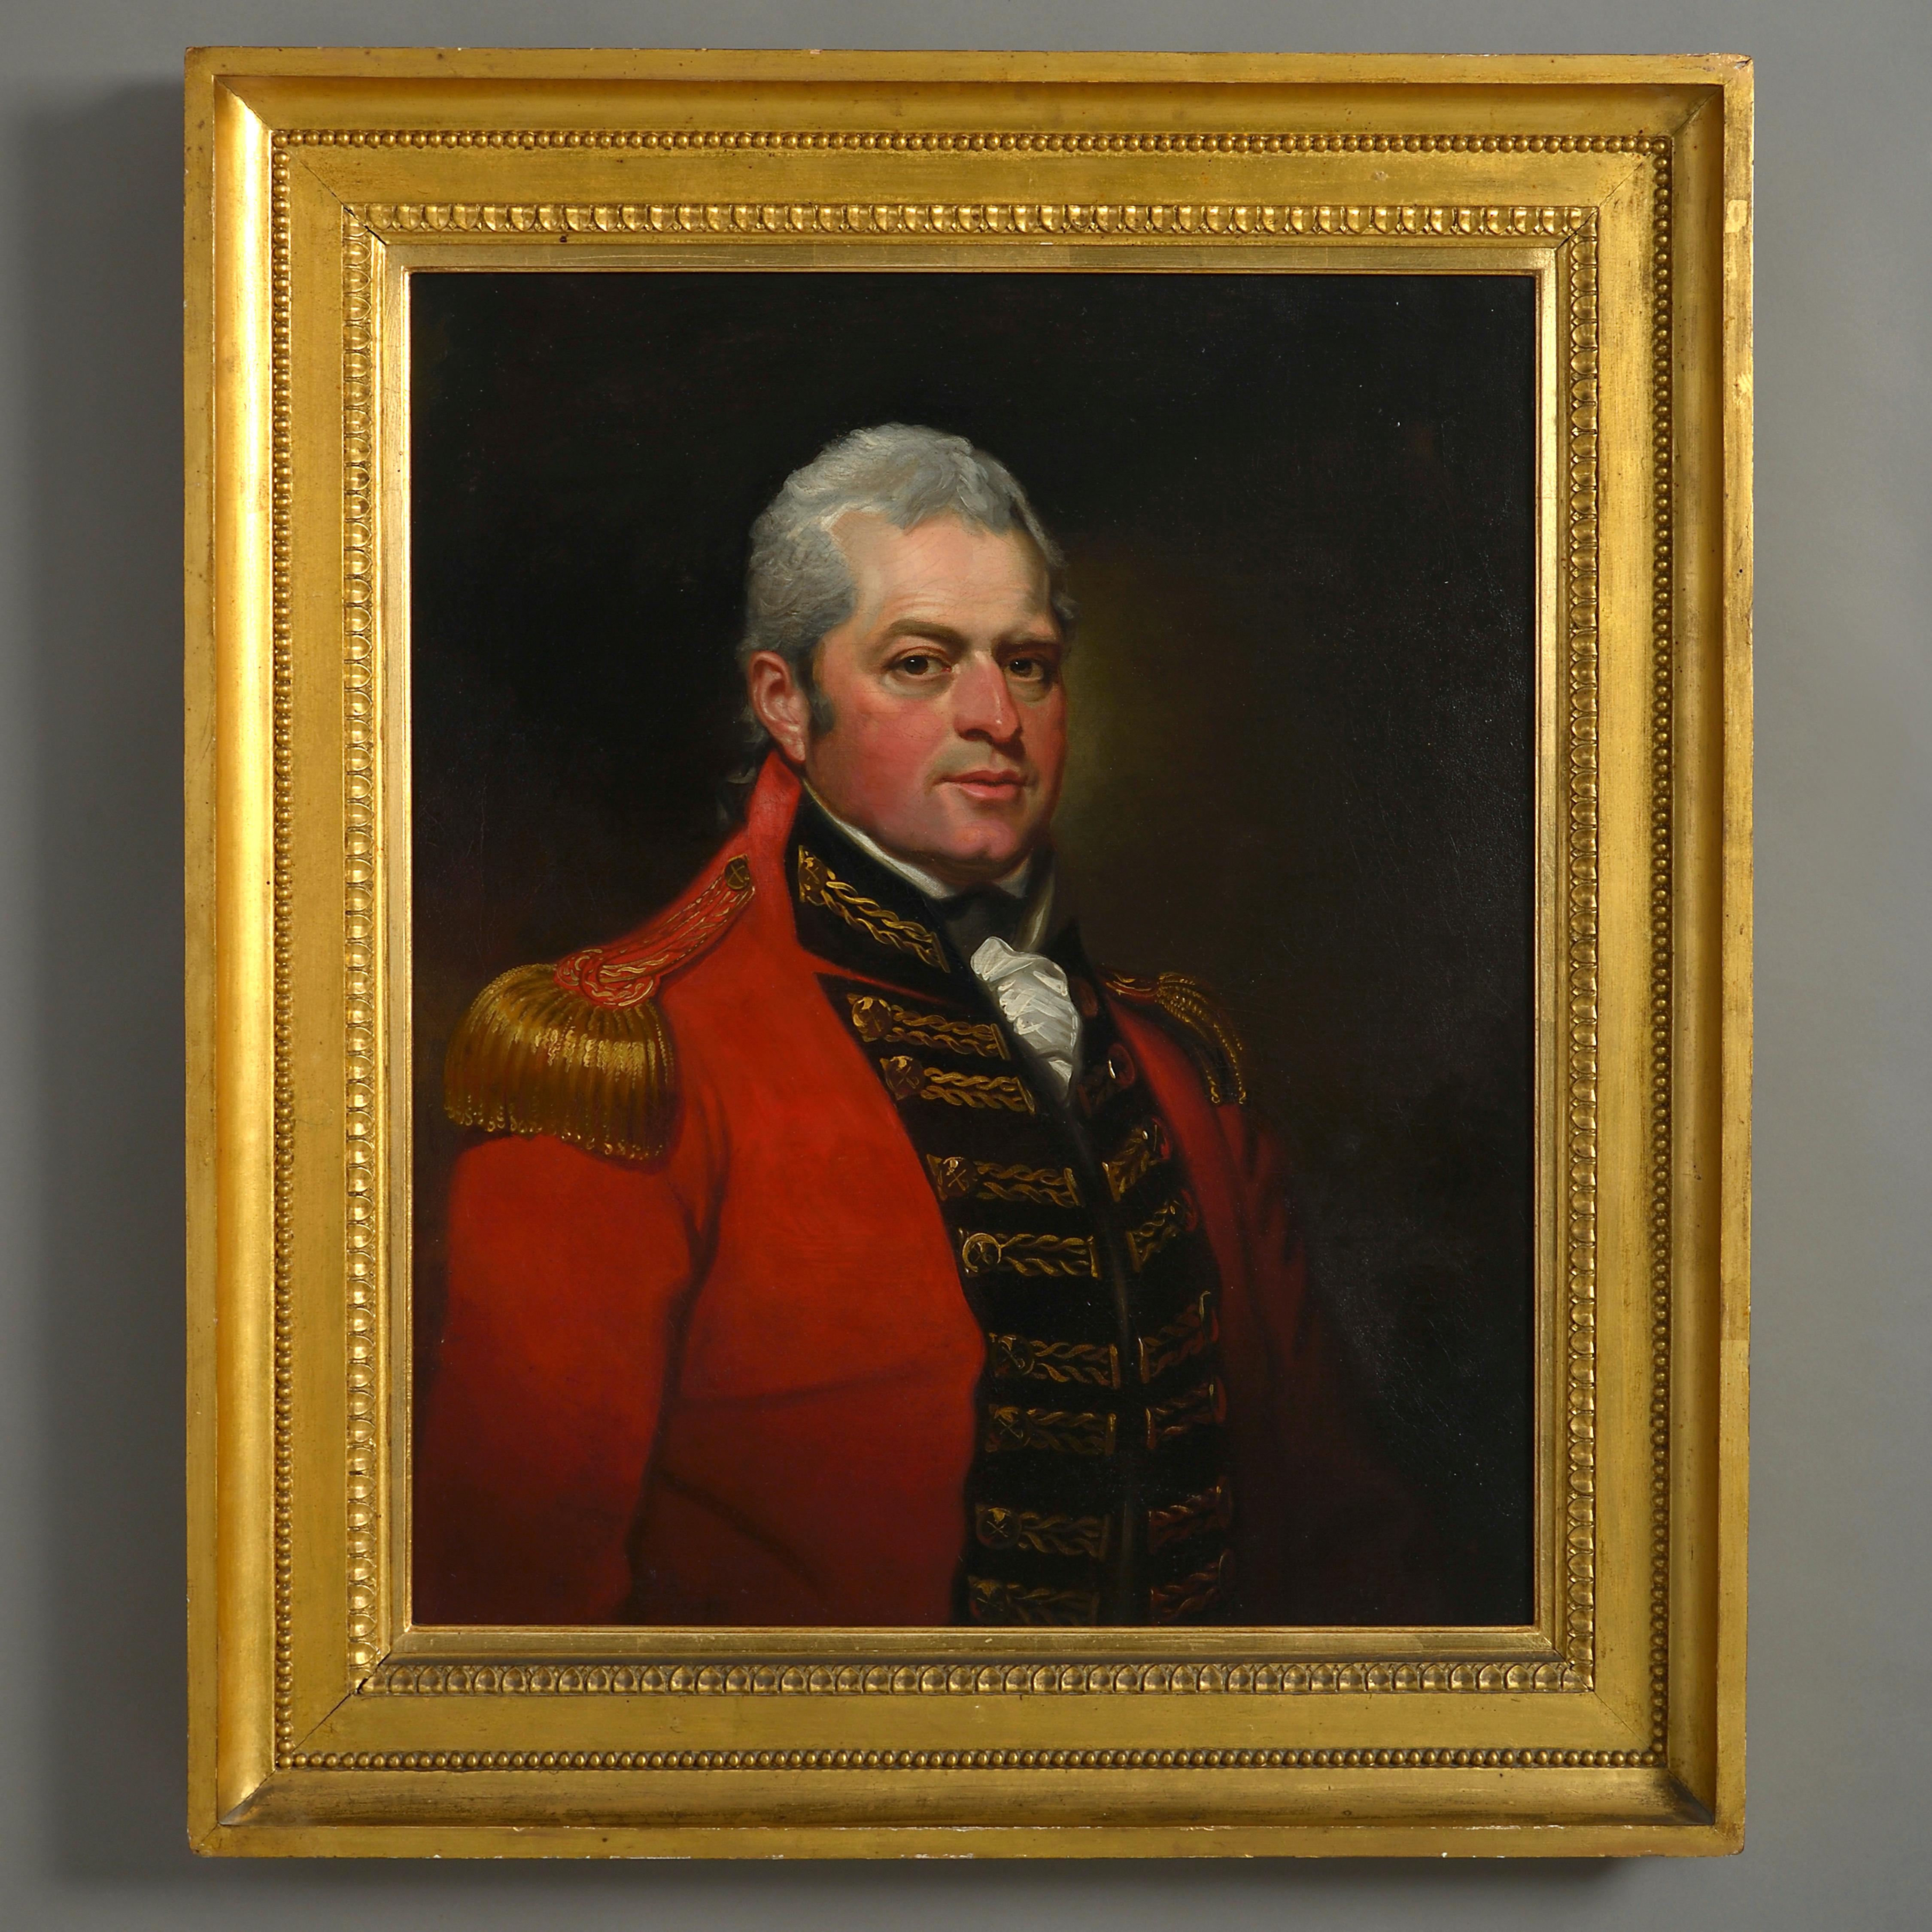 Mather Brown (1761-1831)
Portrait of Major-General John Robinson (1757-1819)

Oil on canvas; held in a period giltwood frame

Provenance: Denston Hall, Suffolk and by descent

Literature:  Suffolk Portraits, mss by Edmund Farrer, 1921. Vol. 5 (West